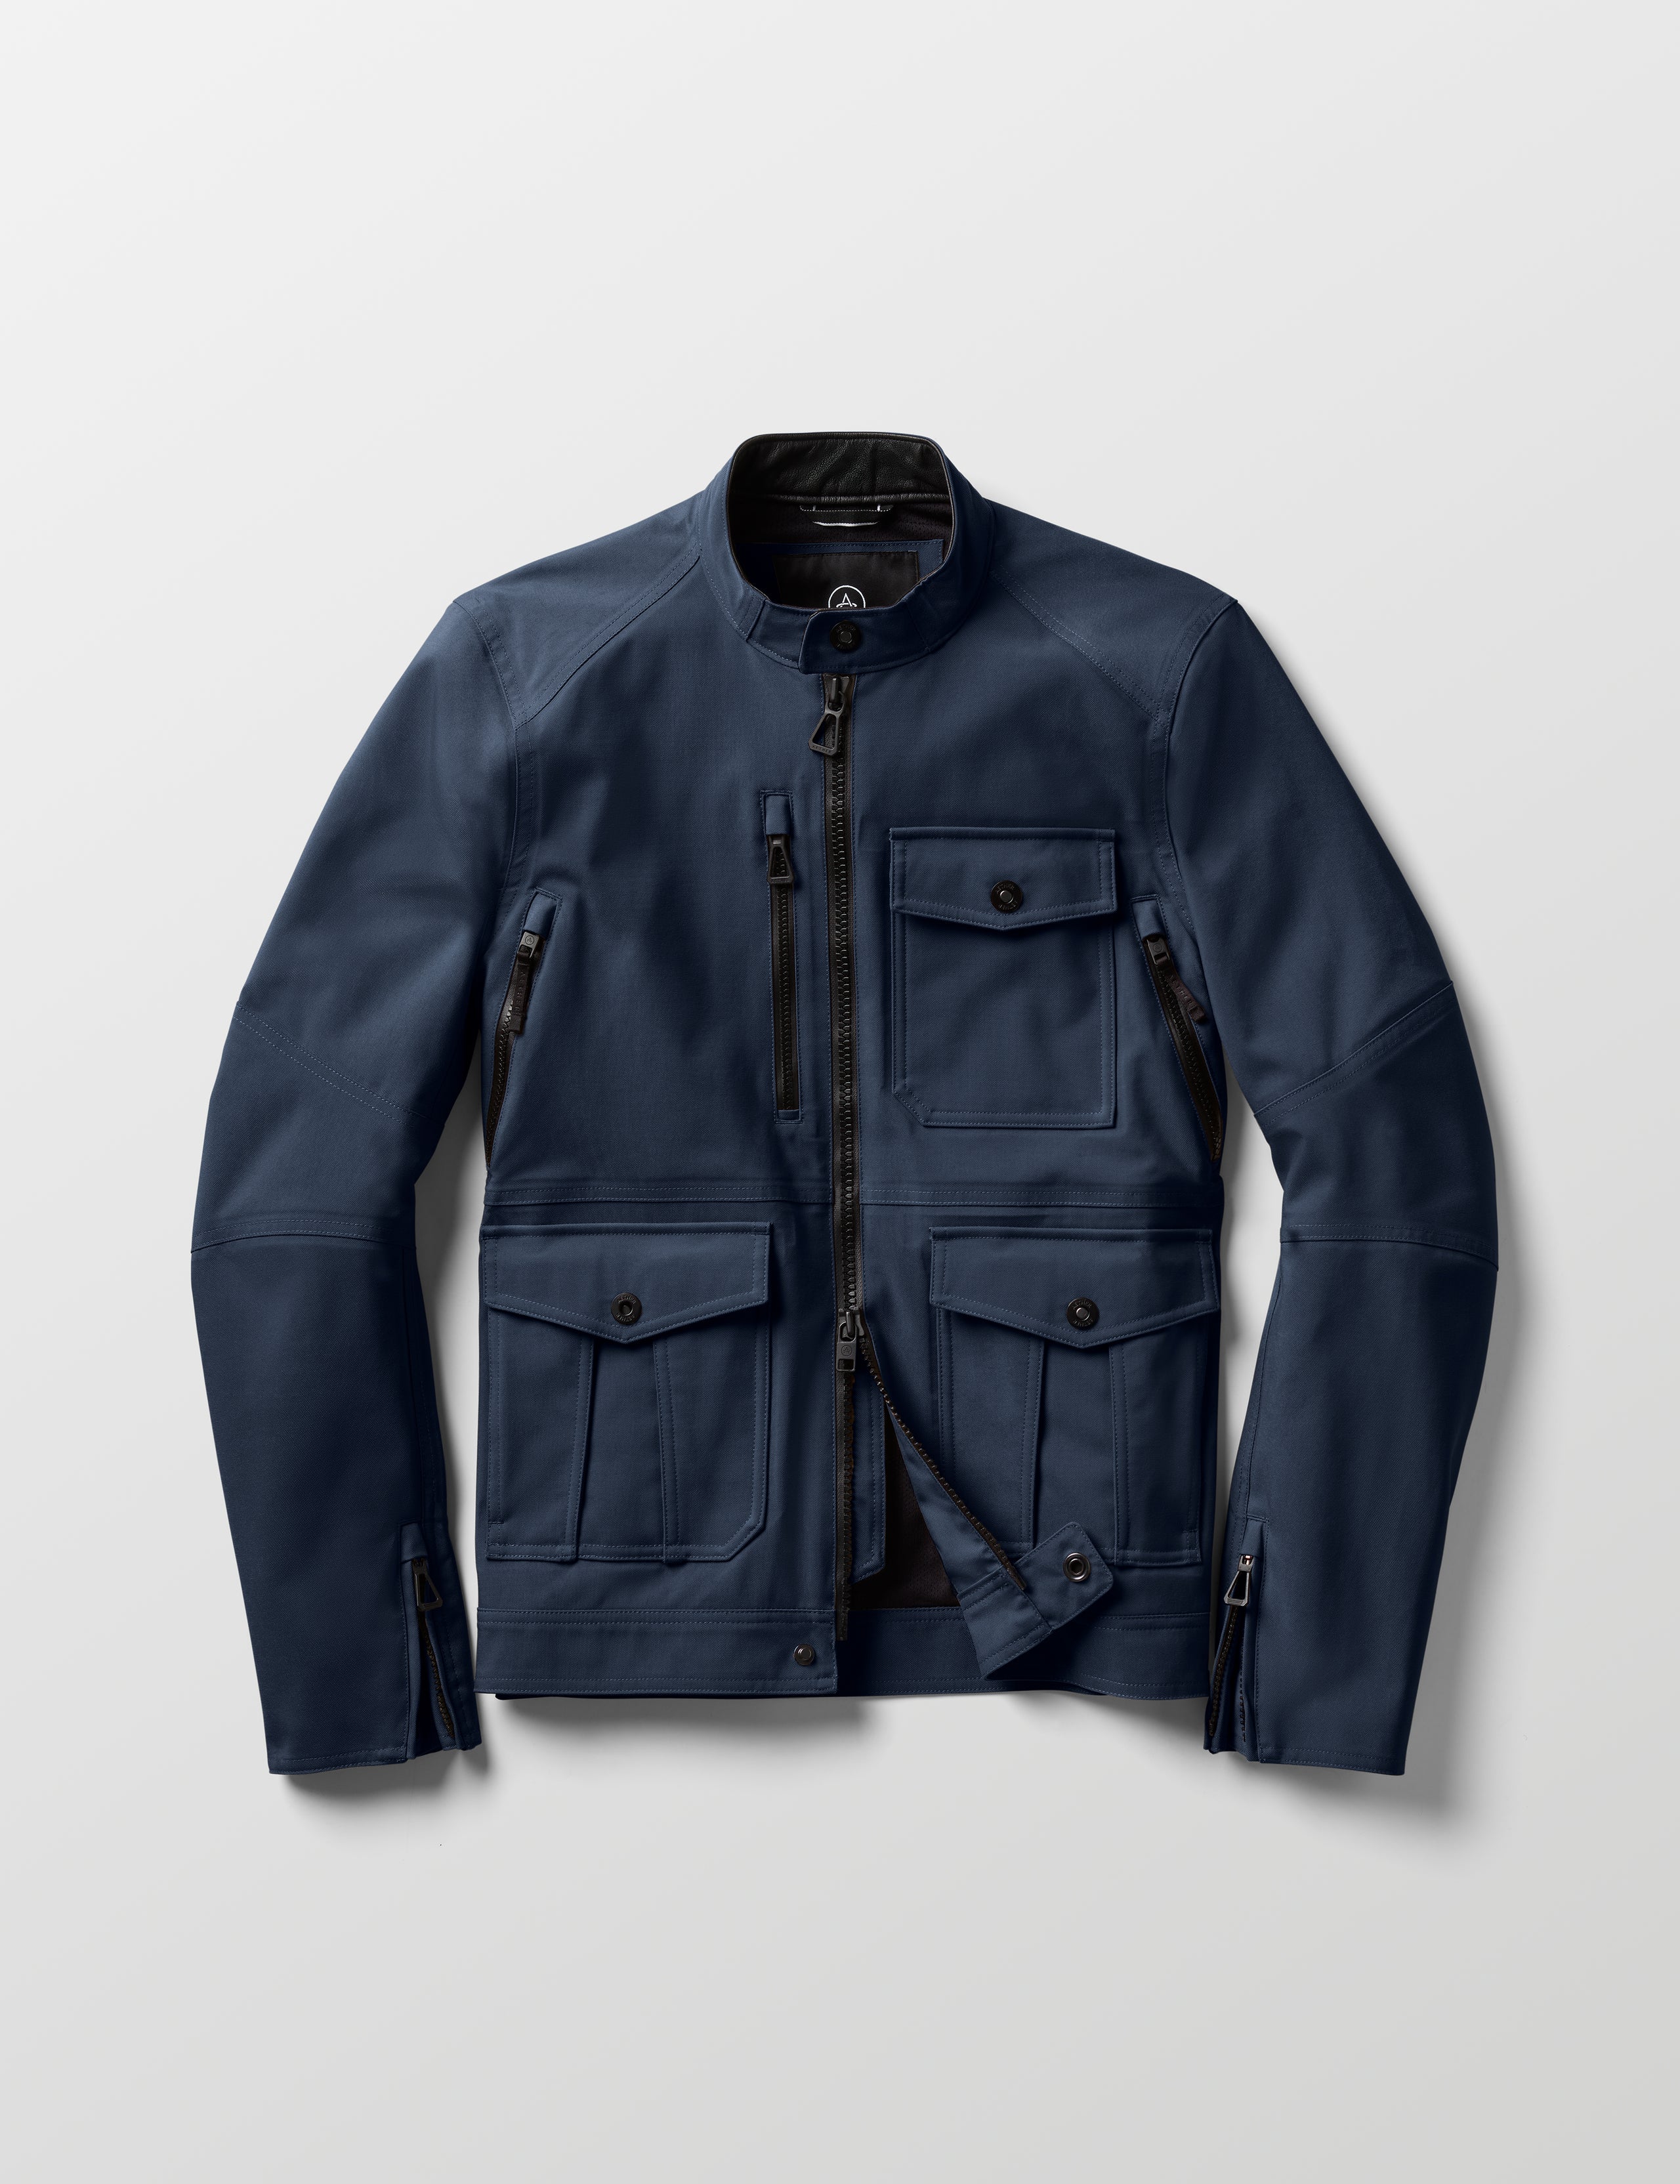 dark blue motorcycle jacket from AETHER Apparel